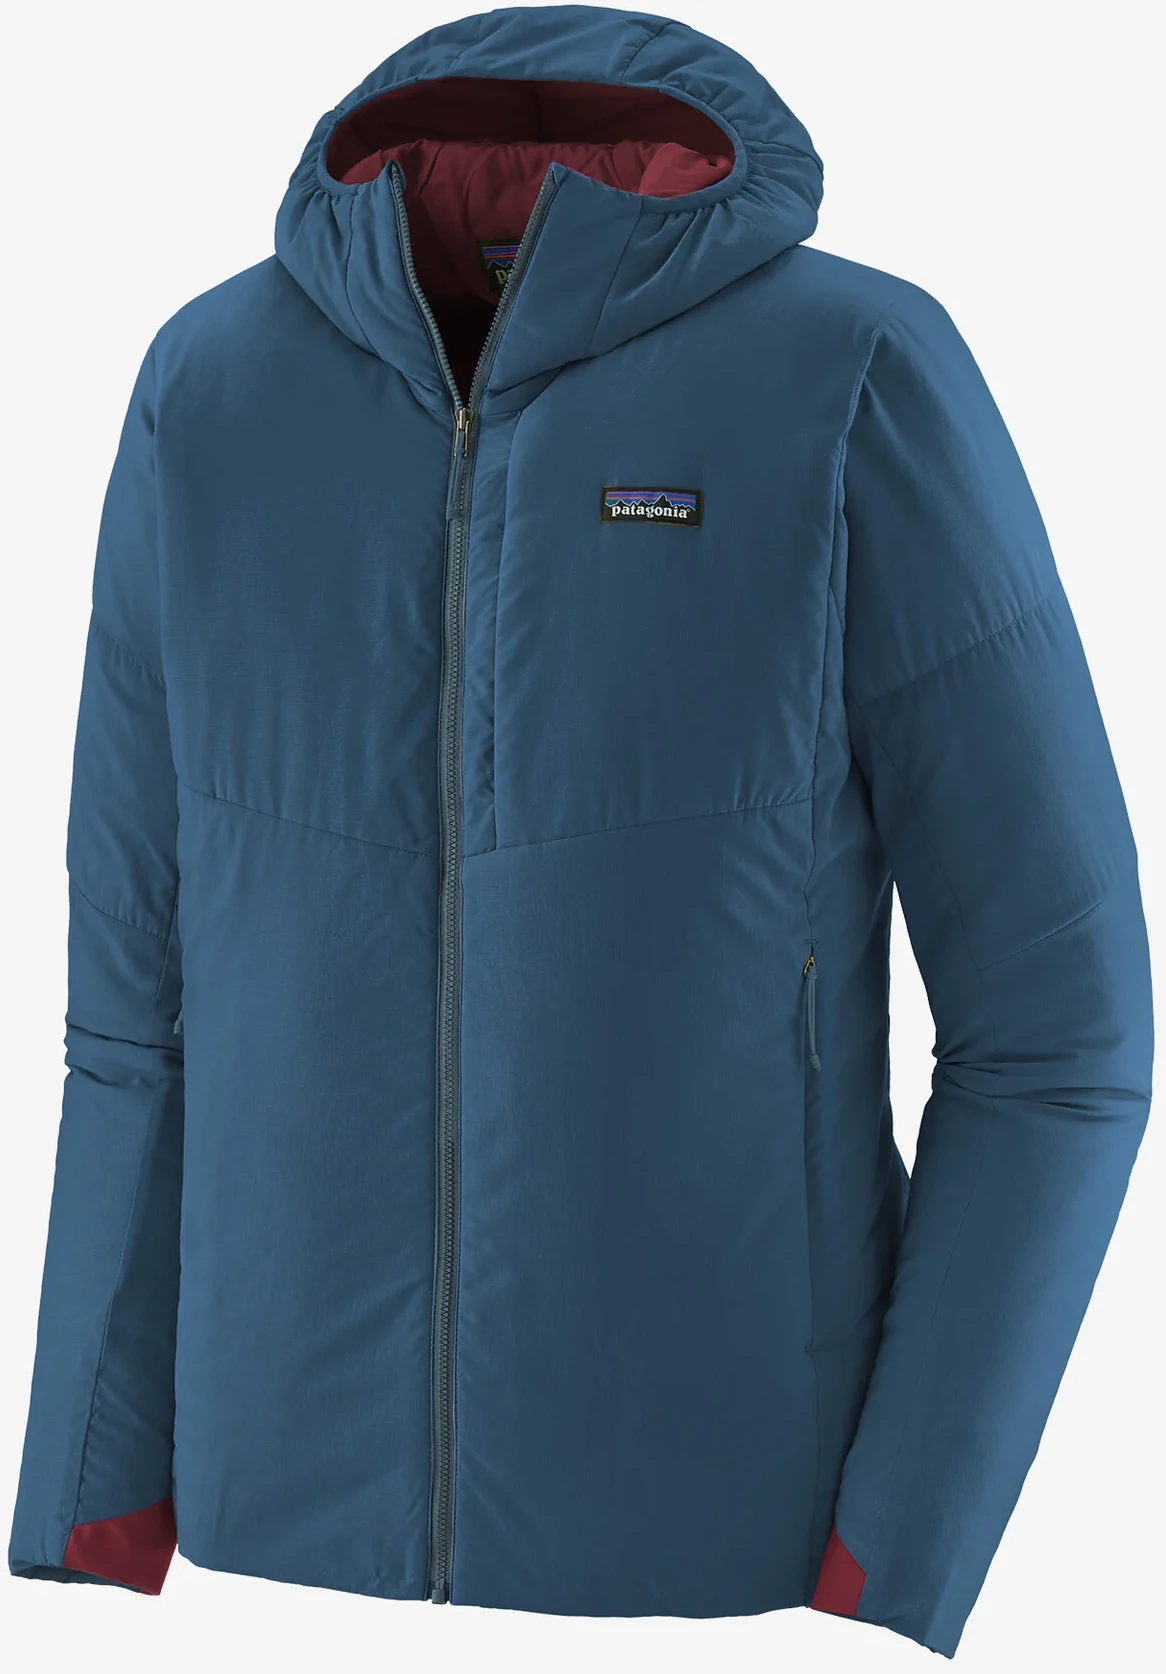 Unlock Wilderness' choice in the Patagonia Vs Arc'teryx comparison, the Nano Air Hoody by Patagonia